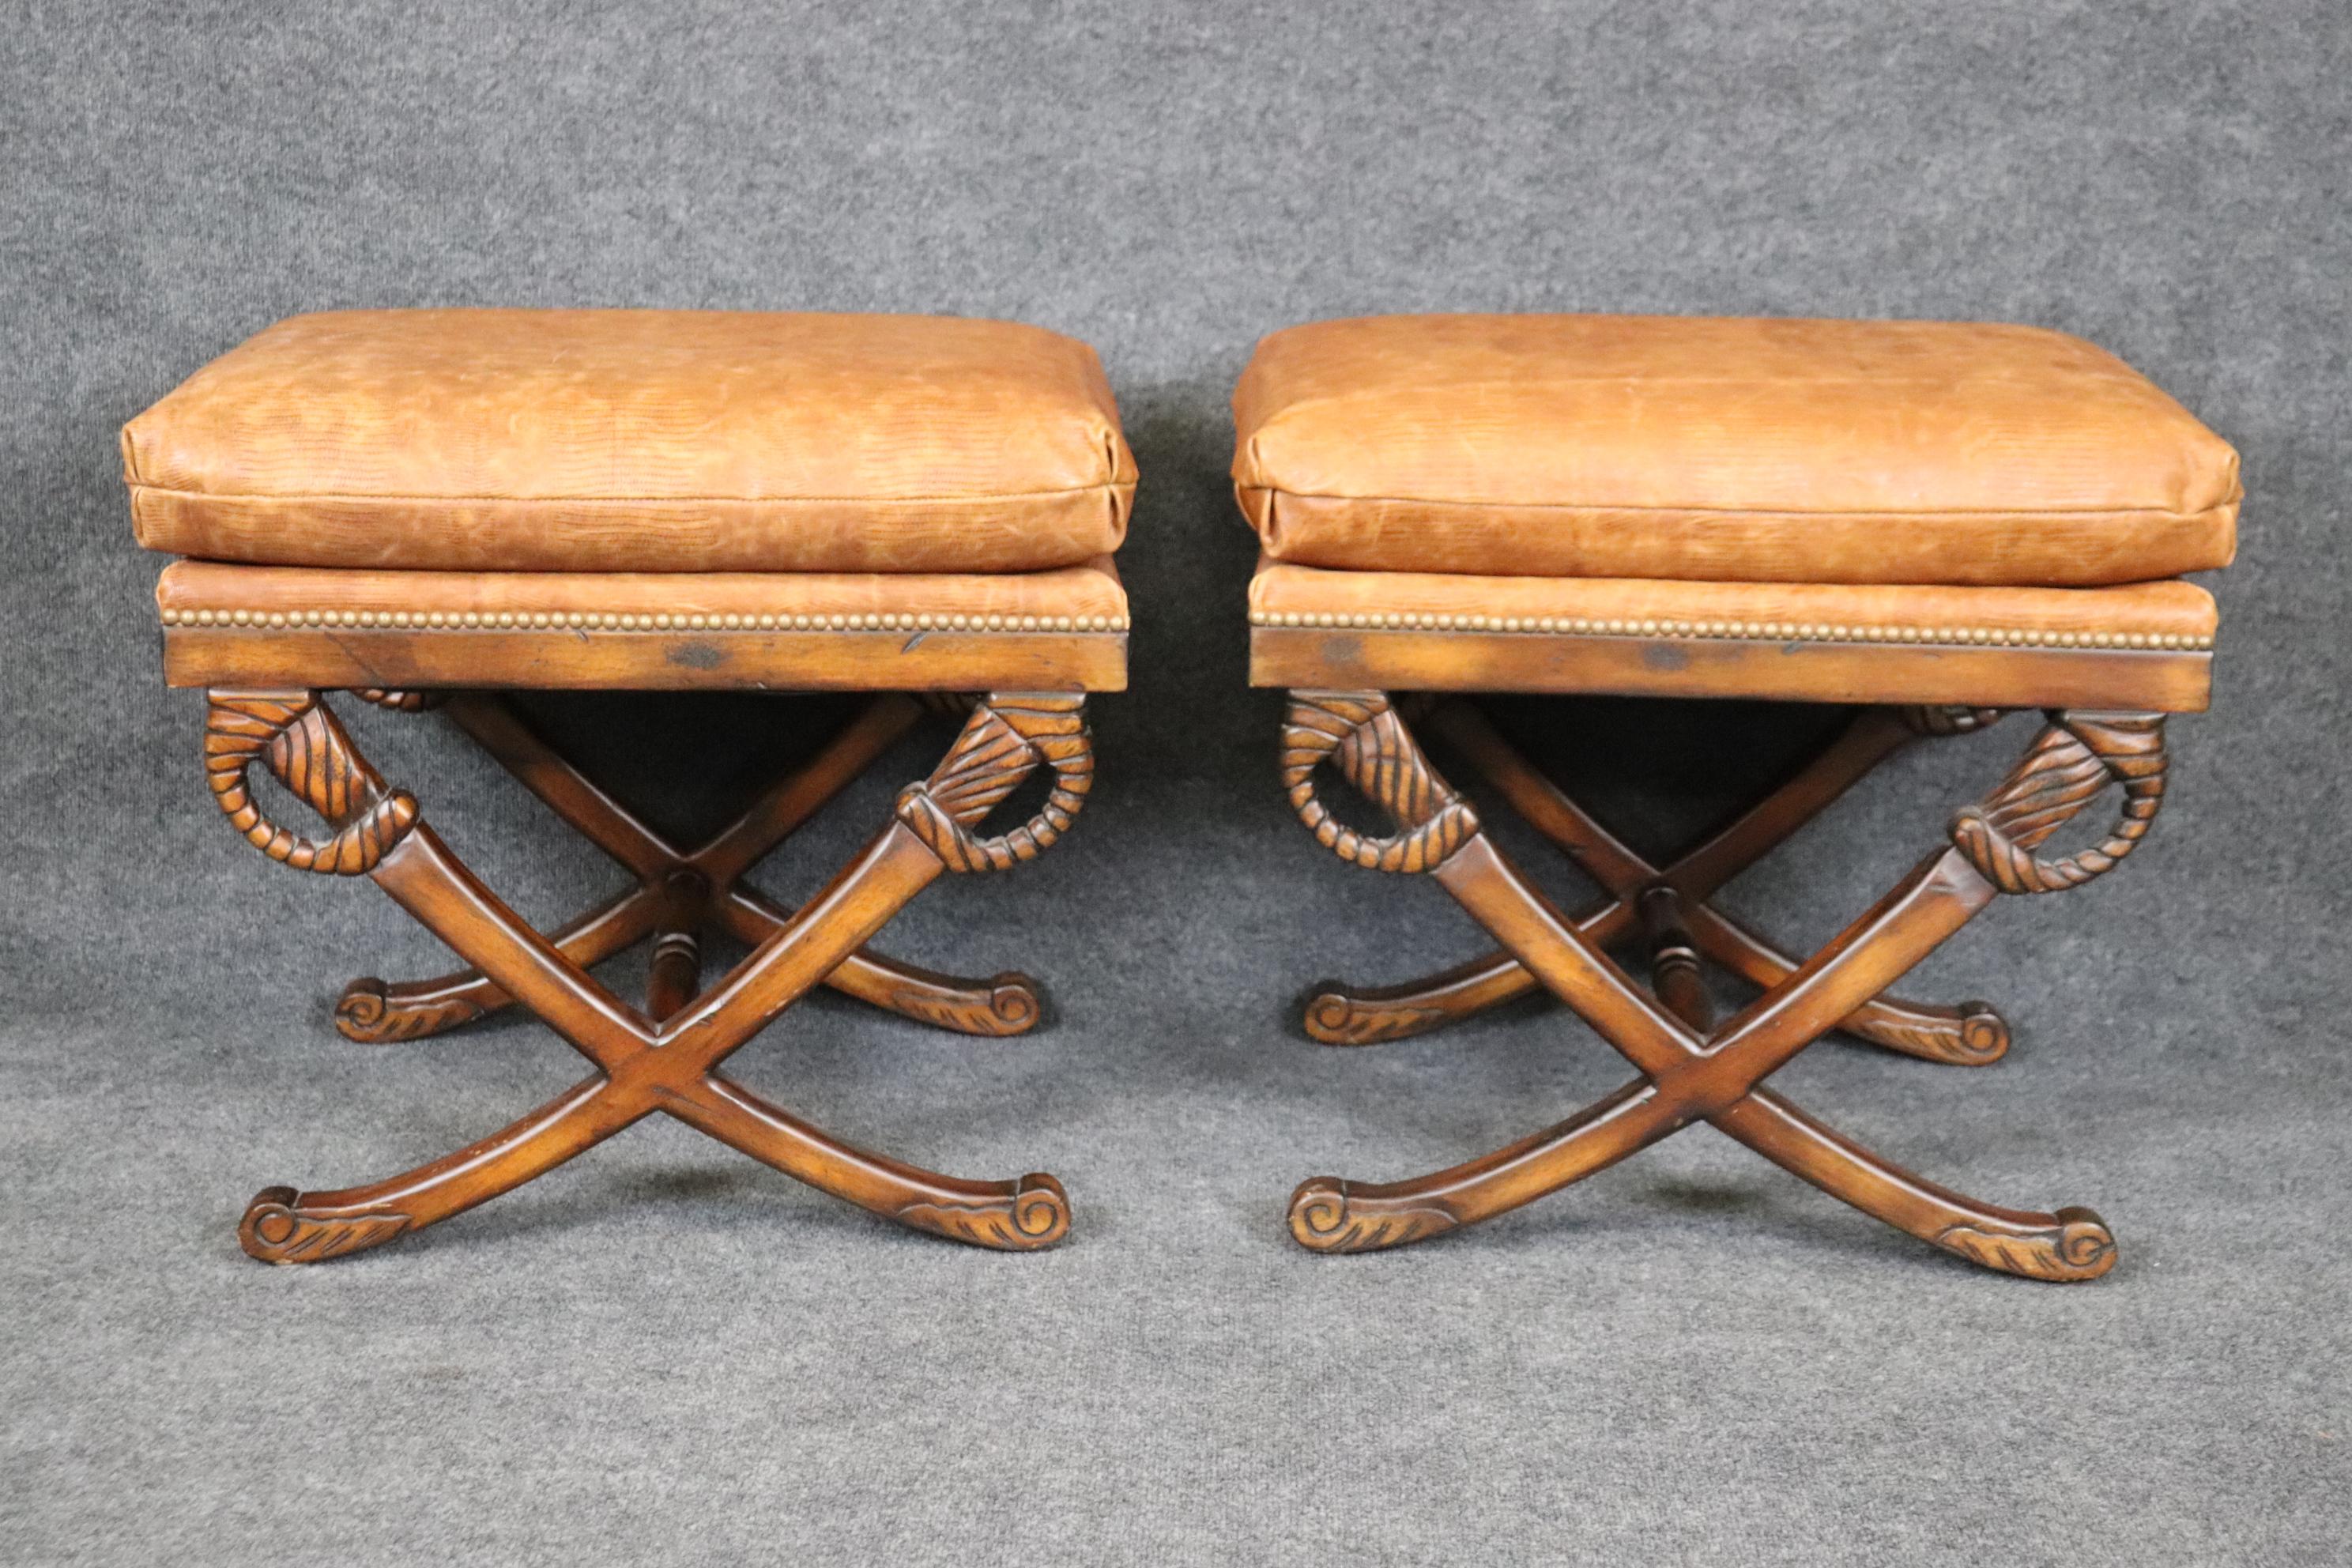 Regency Revival Pair of Walnut Sword and Scabbard X Style Walnut Benches with Faux Alligator For Sale